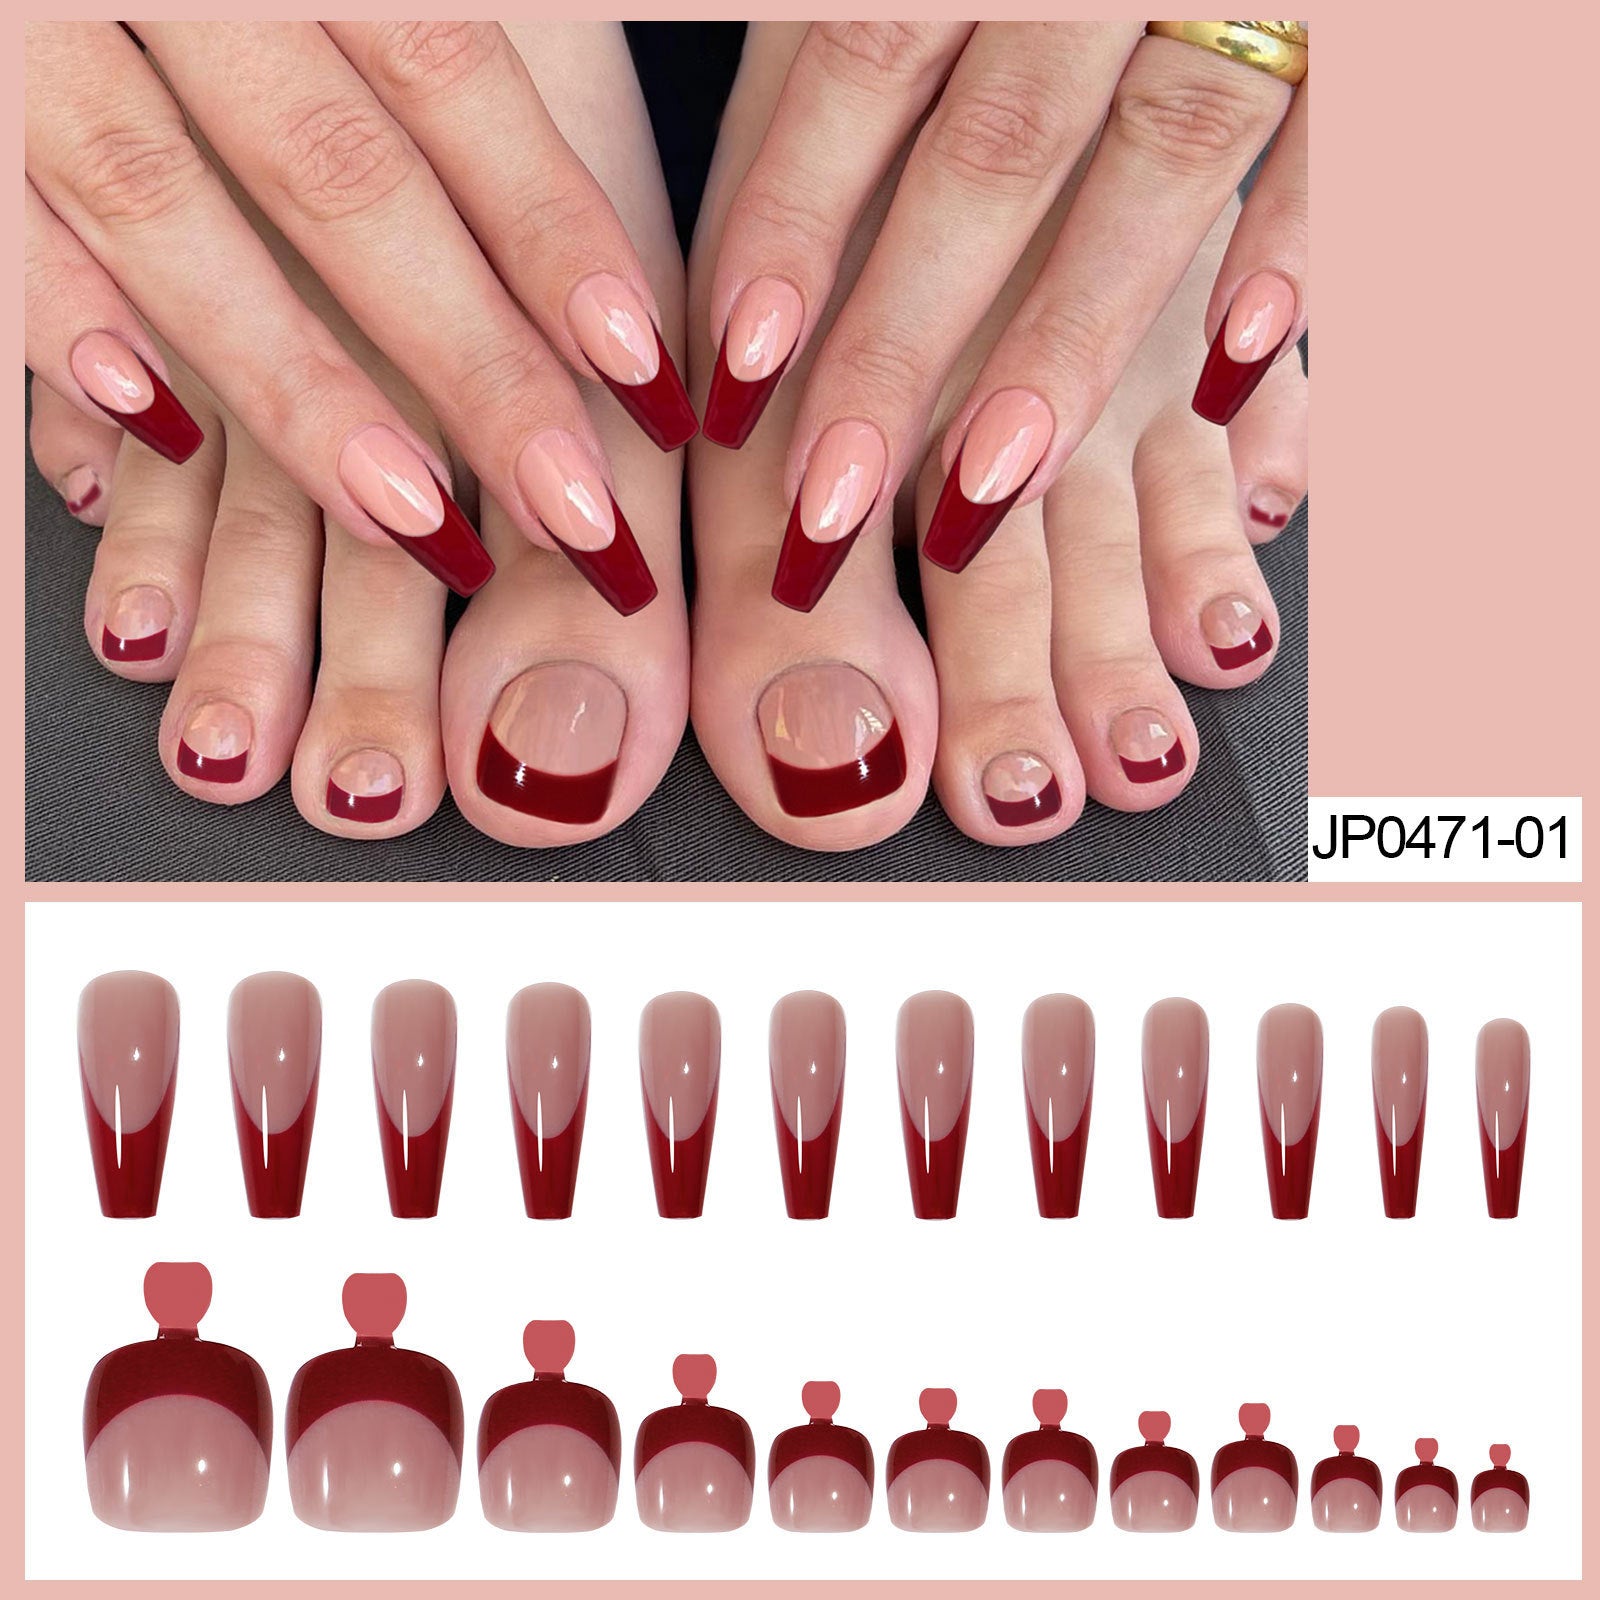 Red french tip ballerina nail (hands and feet nails kit)